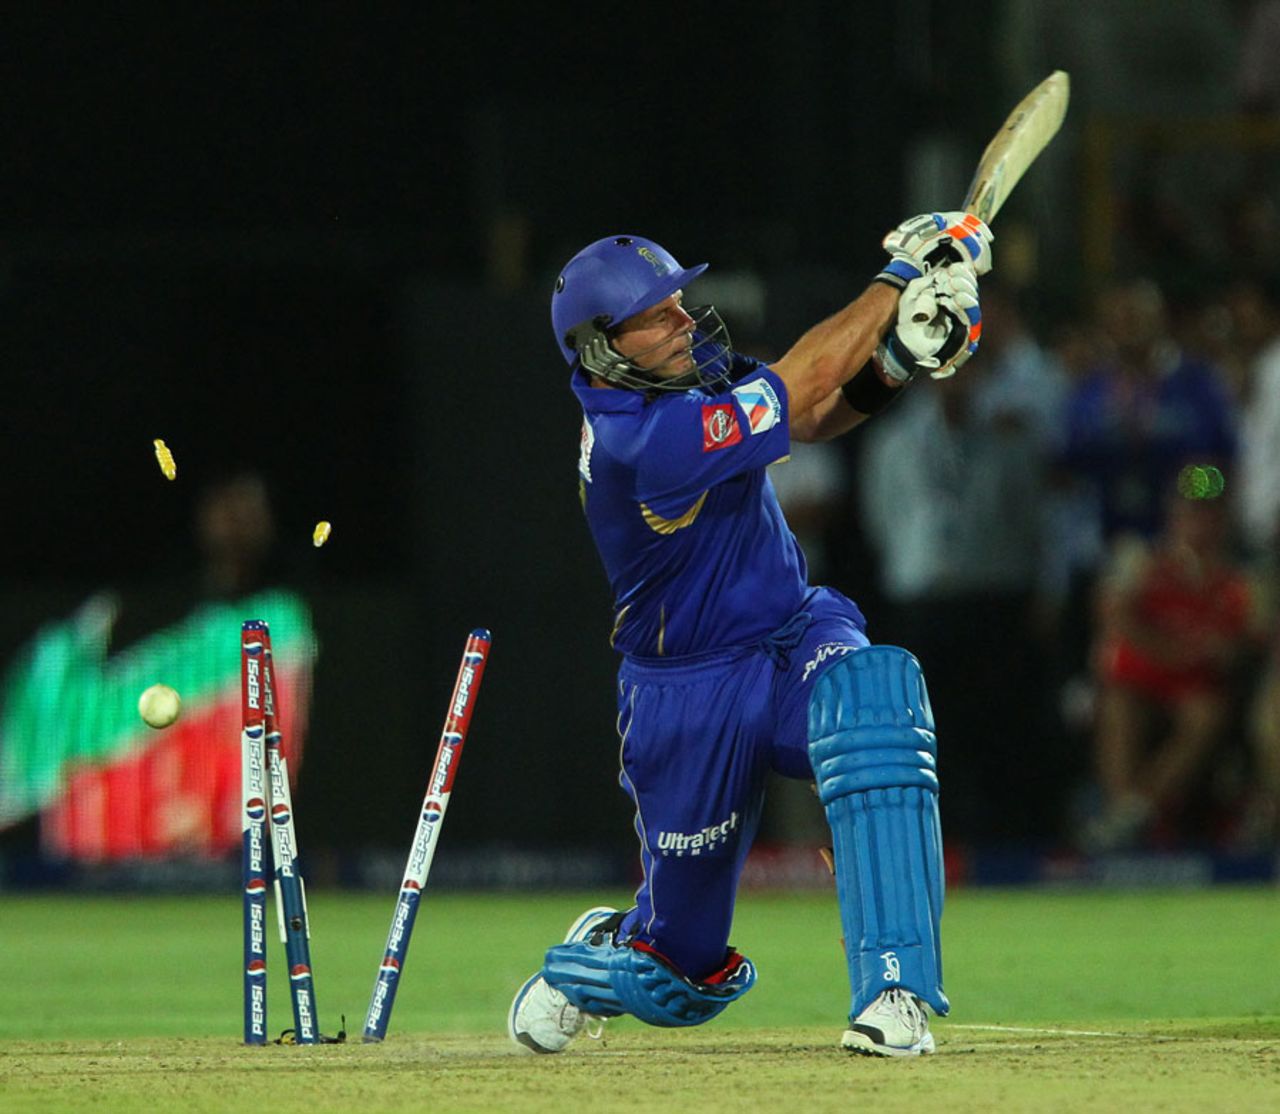 Brad Hodge was bowled by Vinay Kumar in the last over, Rajasthan Royals v Royal Challengers Bangalore, IPL 2013, Jaipur, April 29, 2013